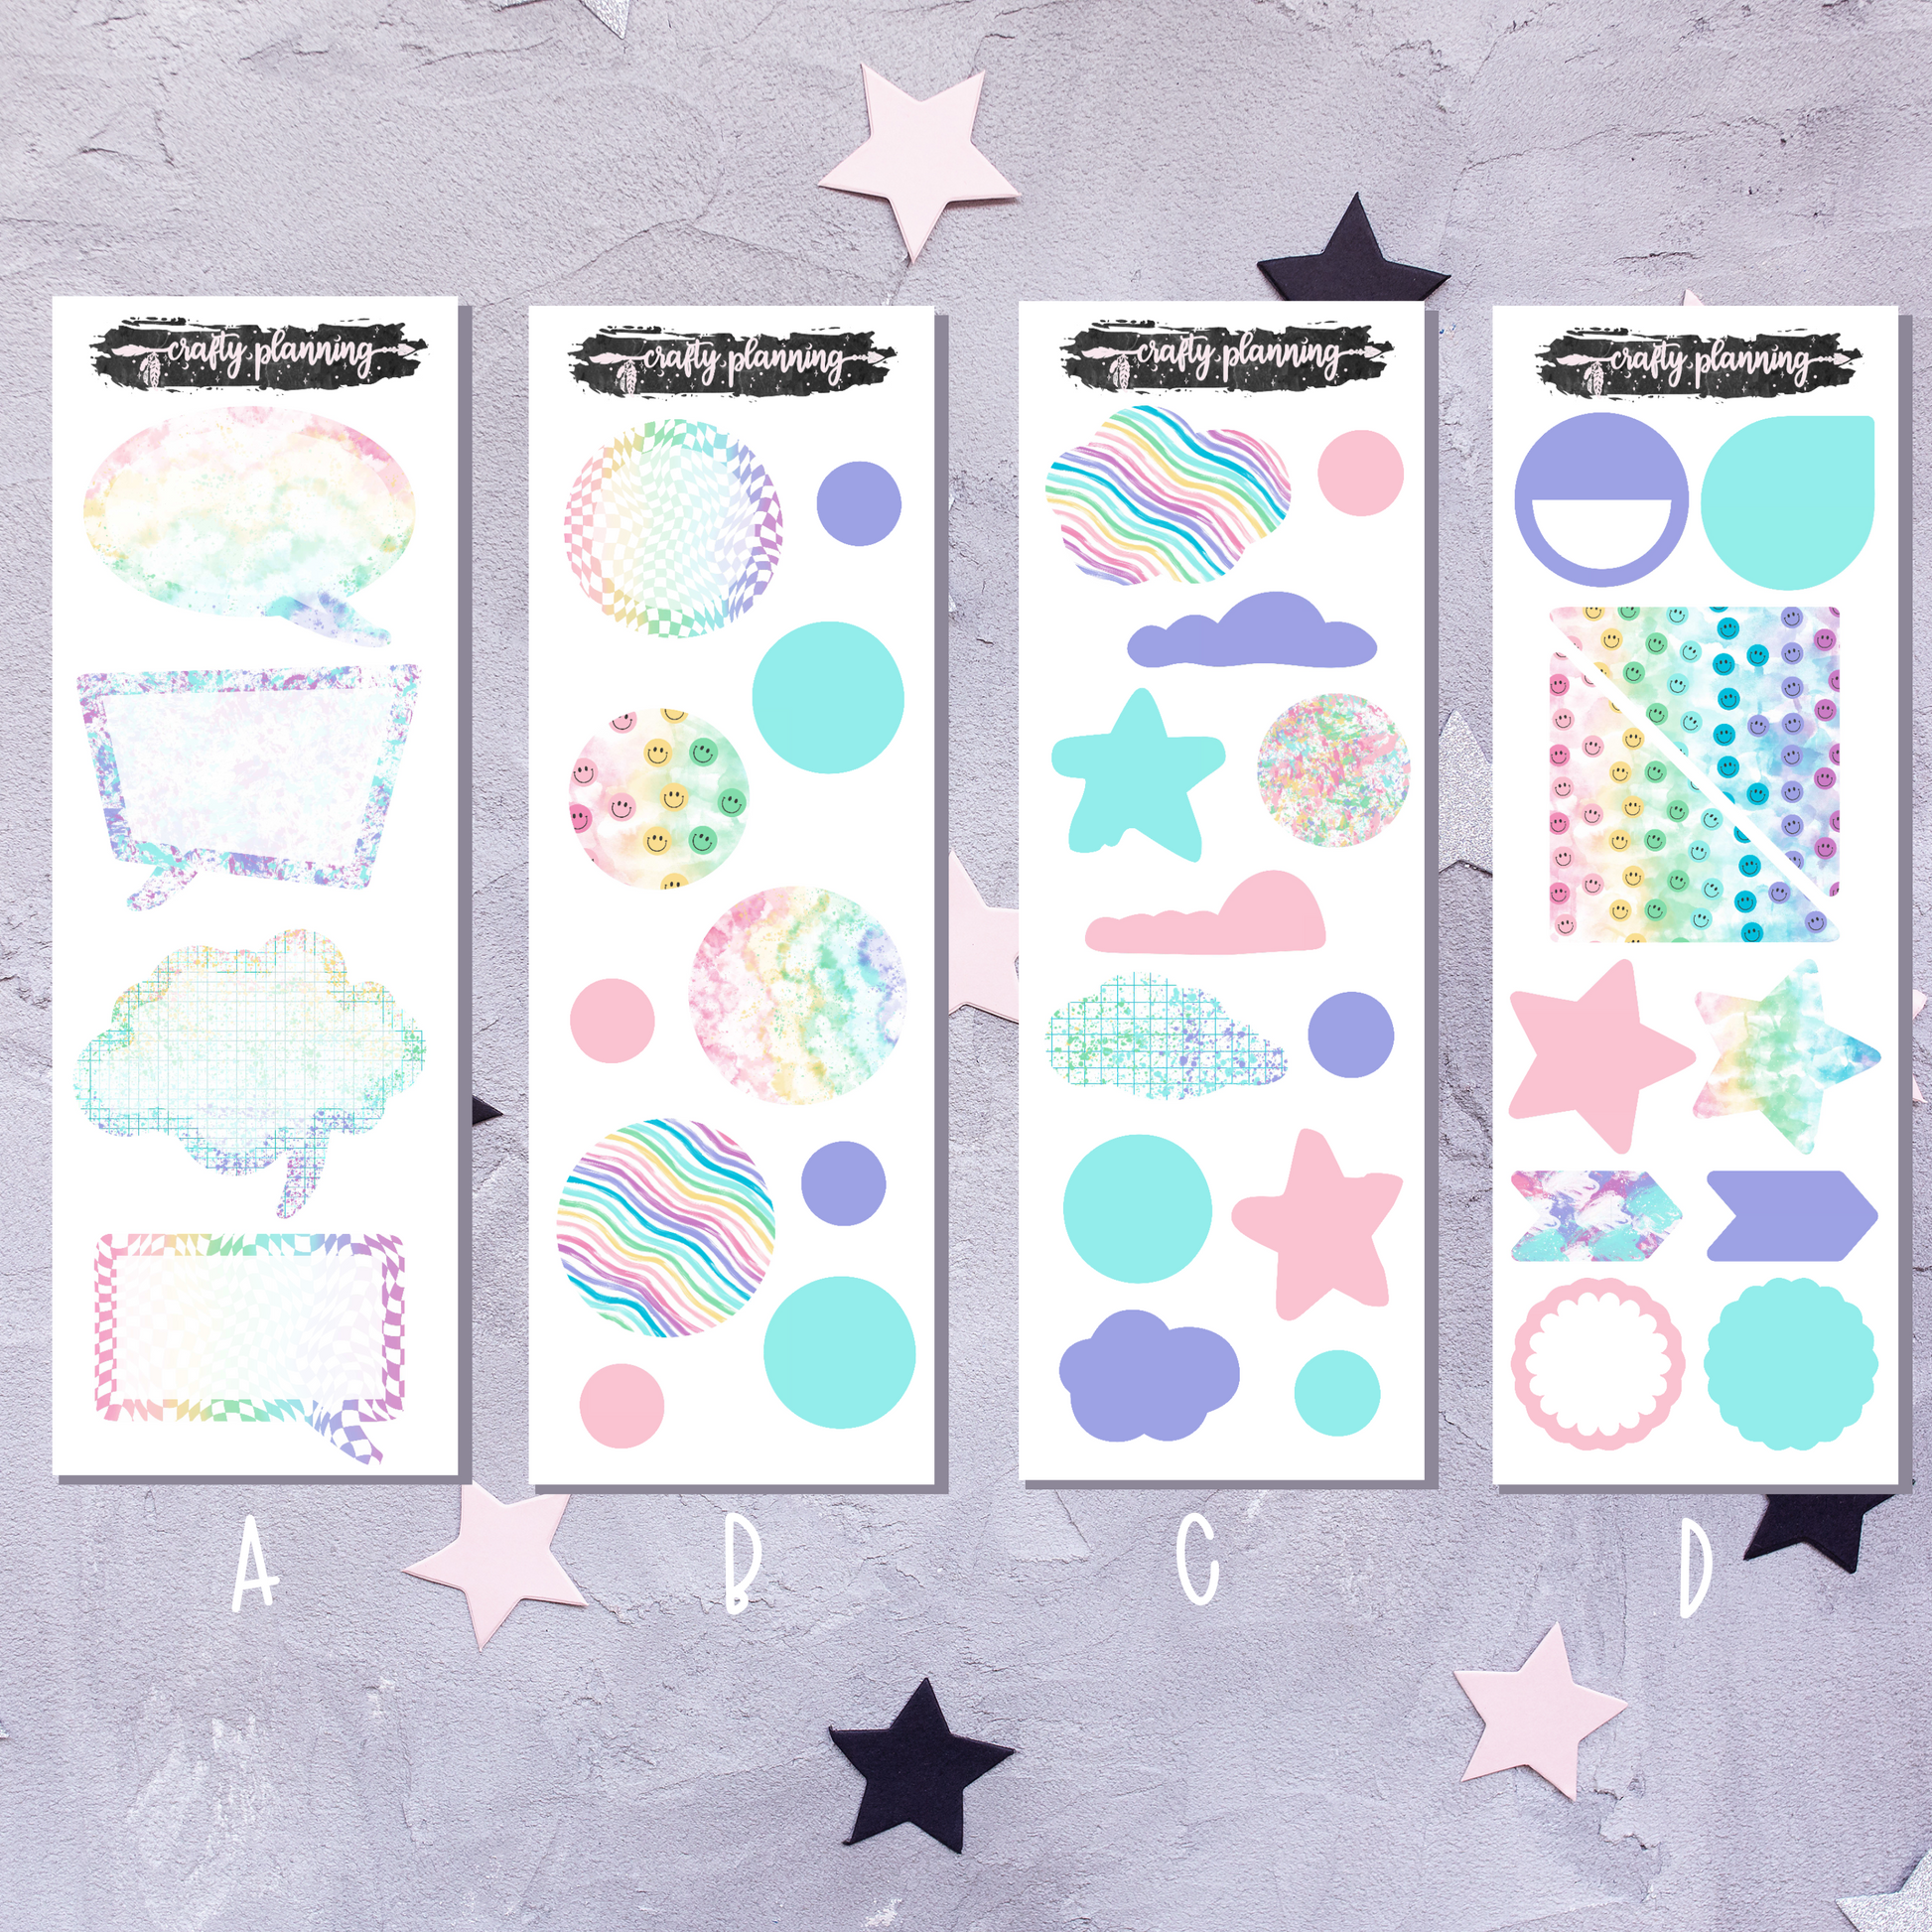 Witch Sticker Sheet, Planner Stickers, Witchy Stickers, Bullet Journal  Stickers, Deco Stickers, Scrapbook Stickers, Halloween Stickers -   Israel